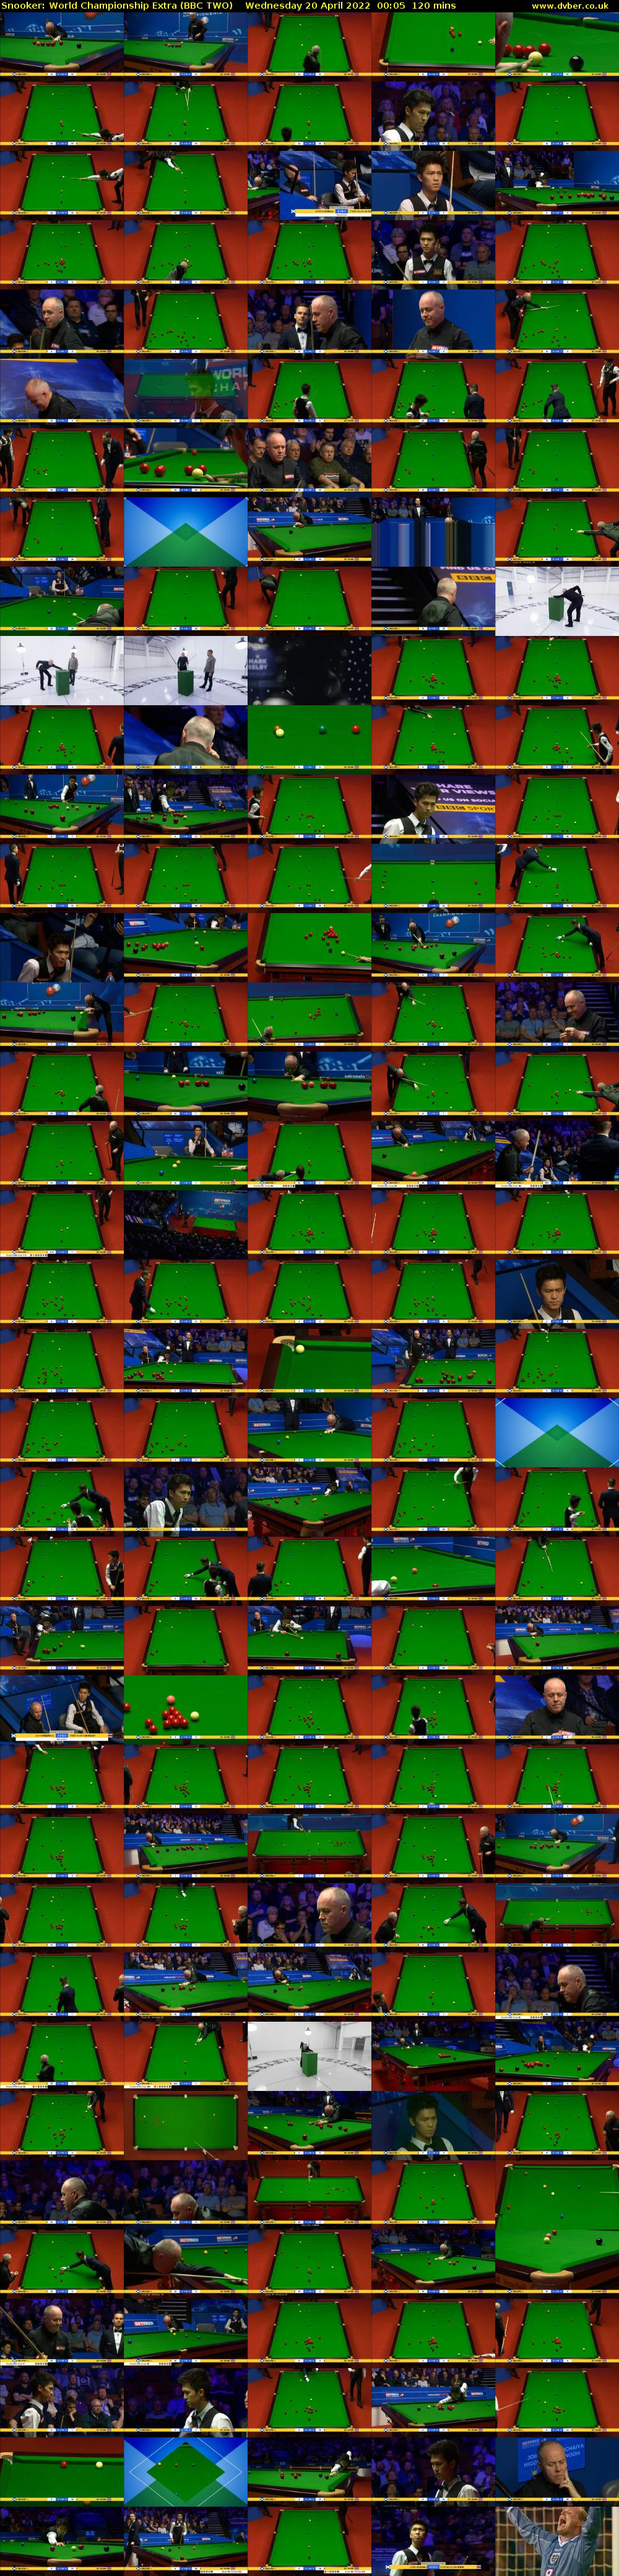 Snooker: World Championship Extra (BBC TWO) Wednesday 20 April 2022 00:05 - 02:05